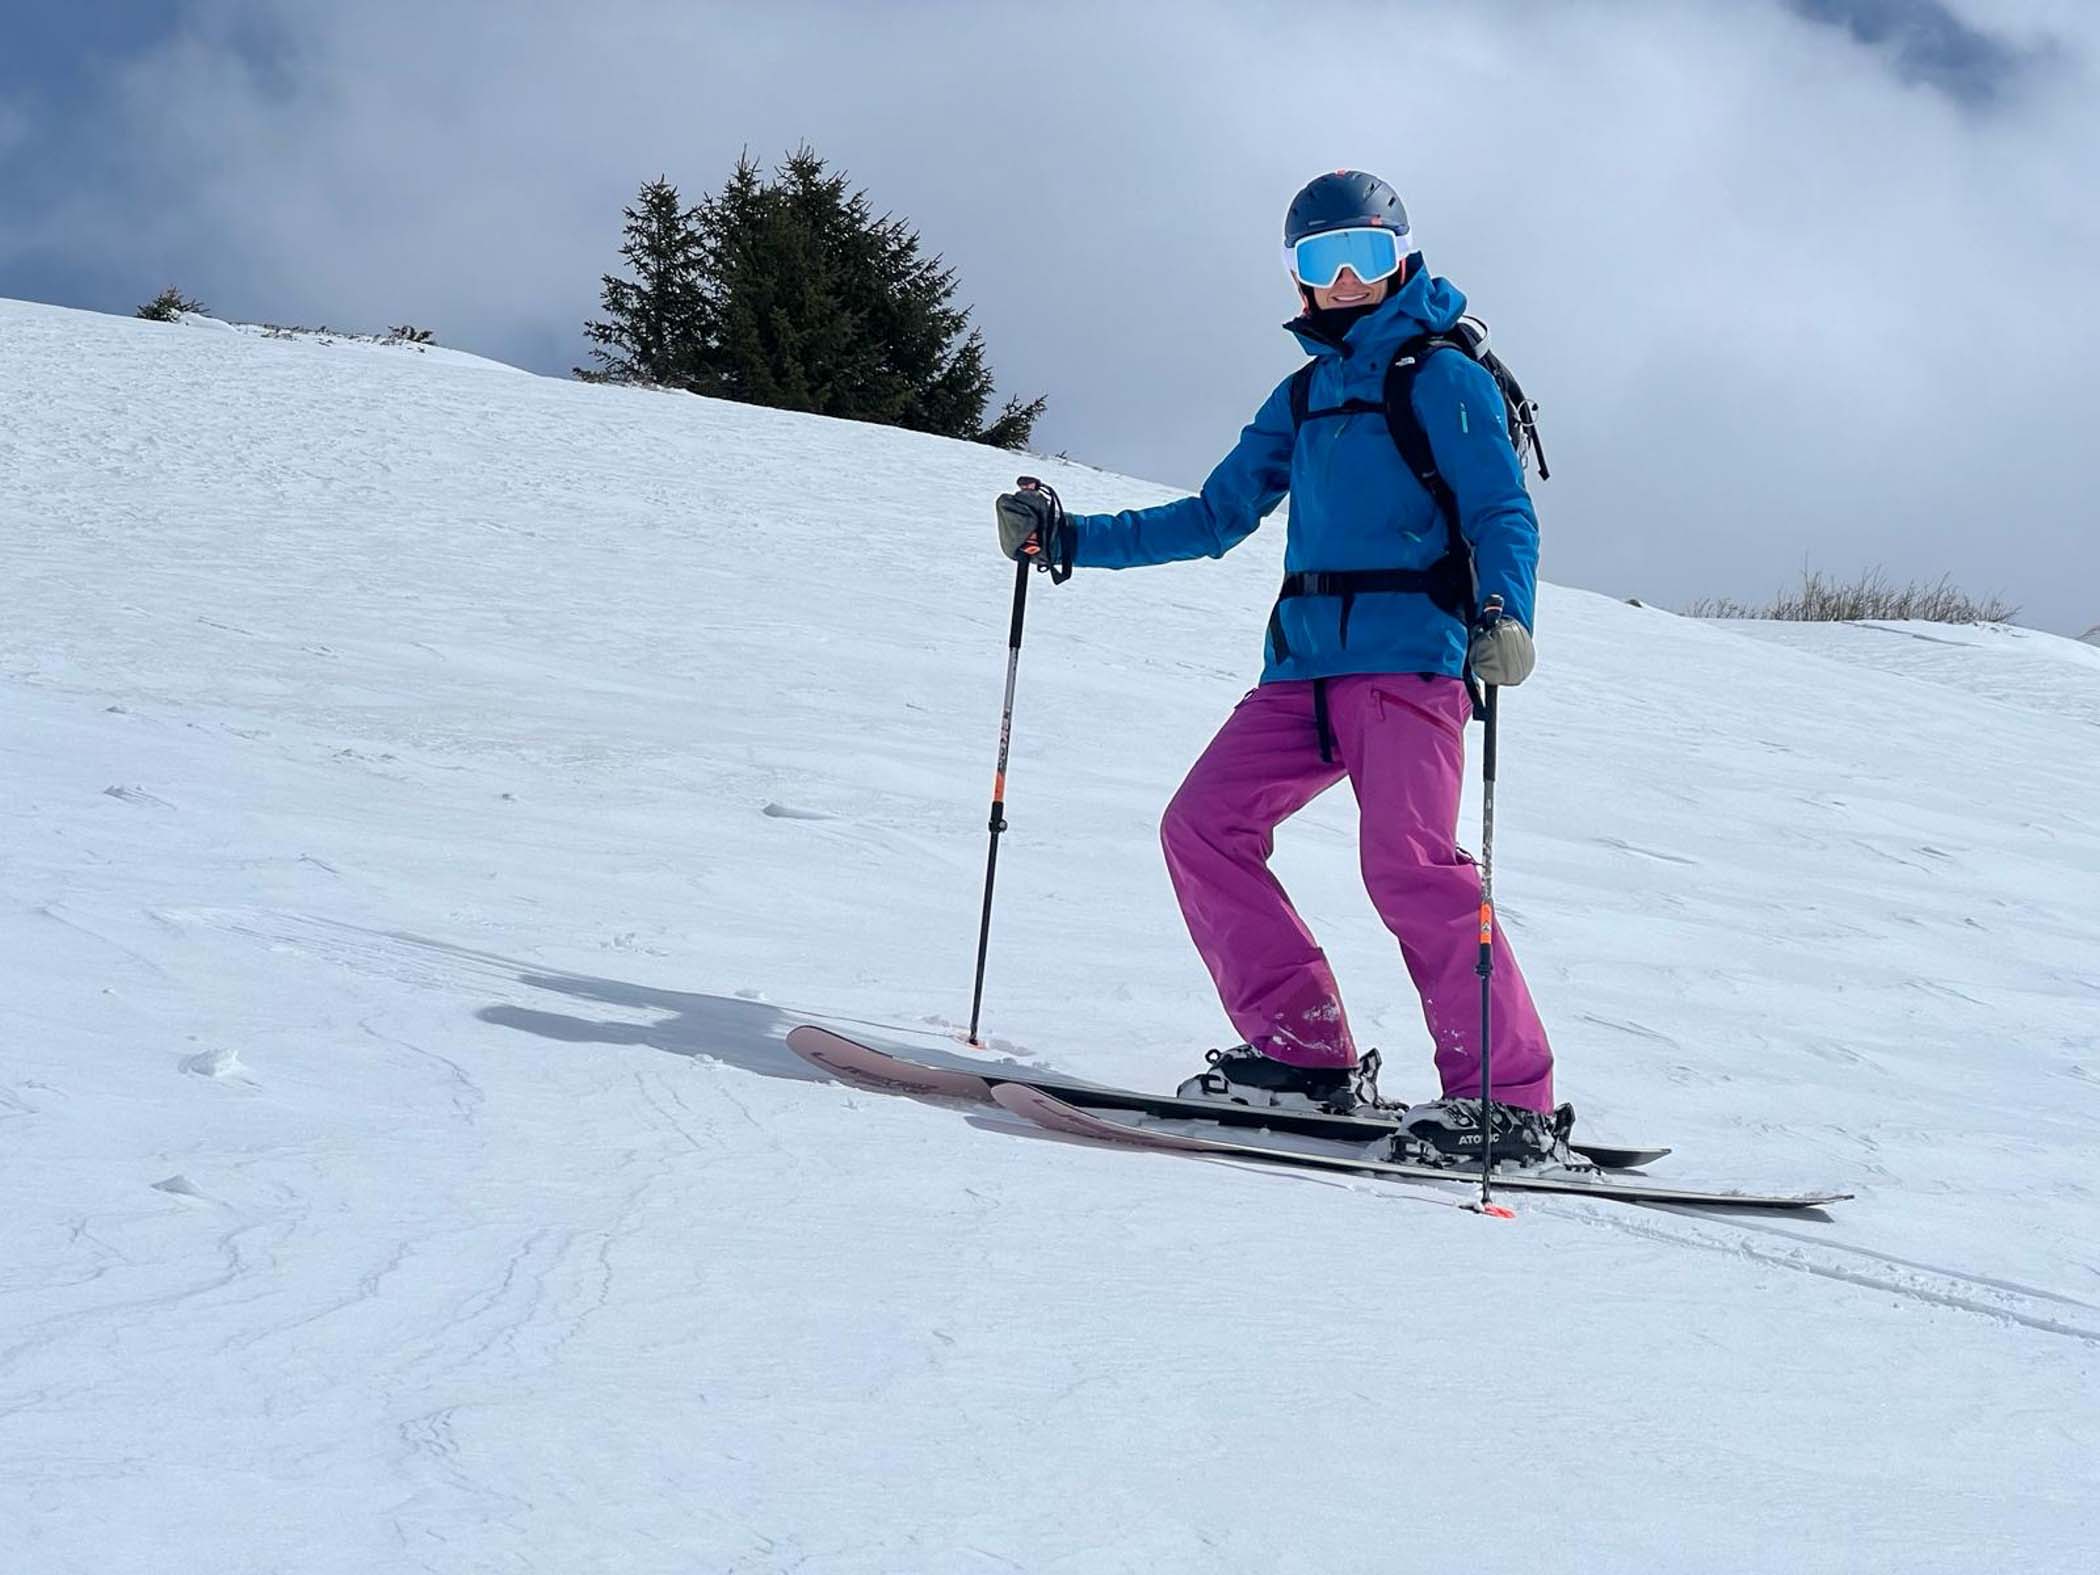 skier in purple ski pants and blue jacket, stands on the slope smiling at camera, with goggles on